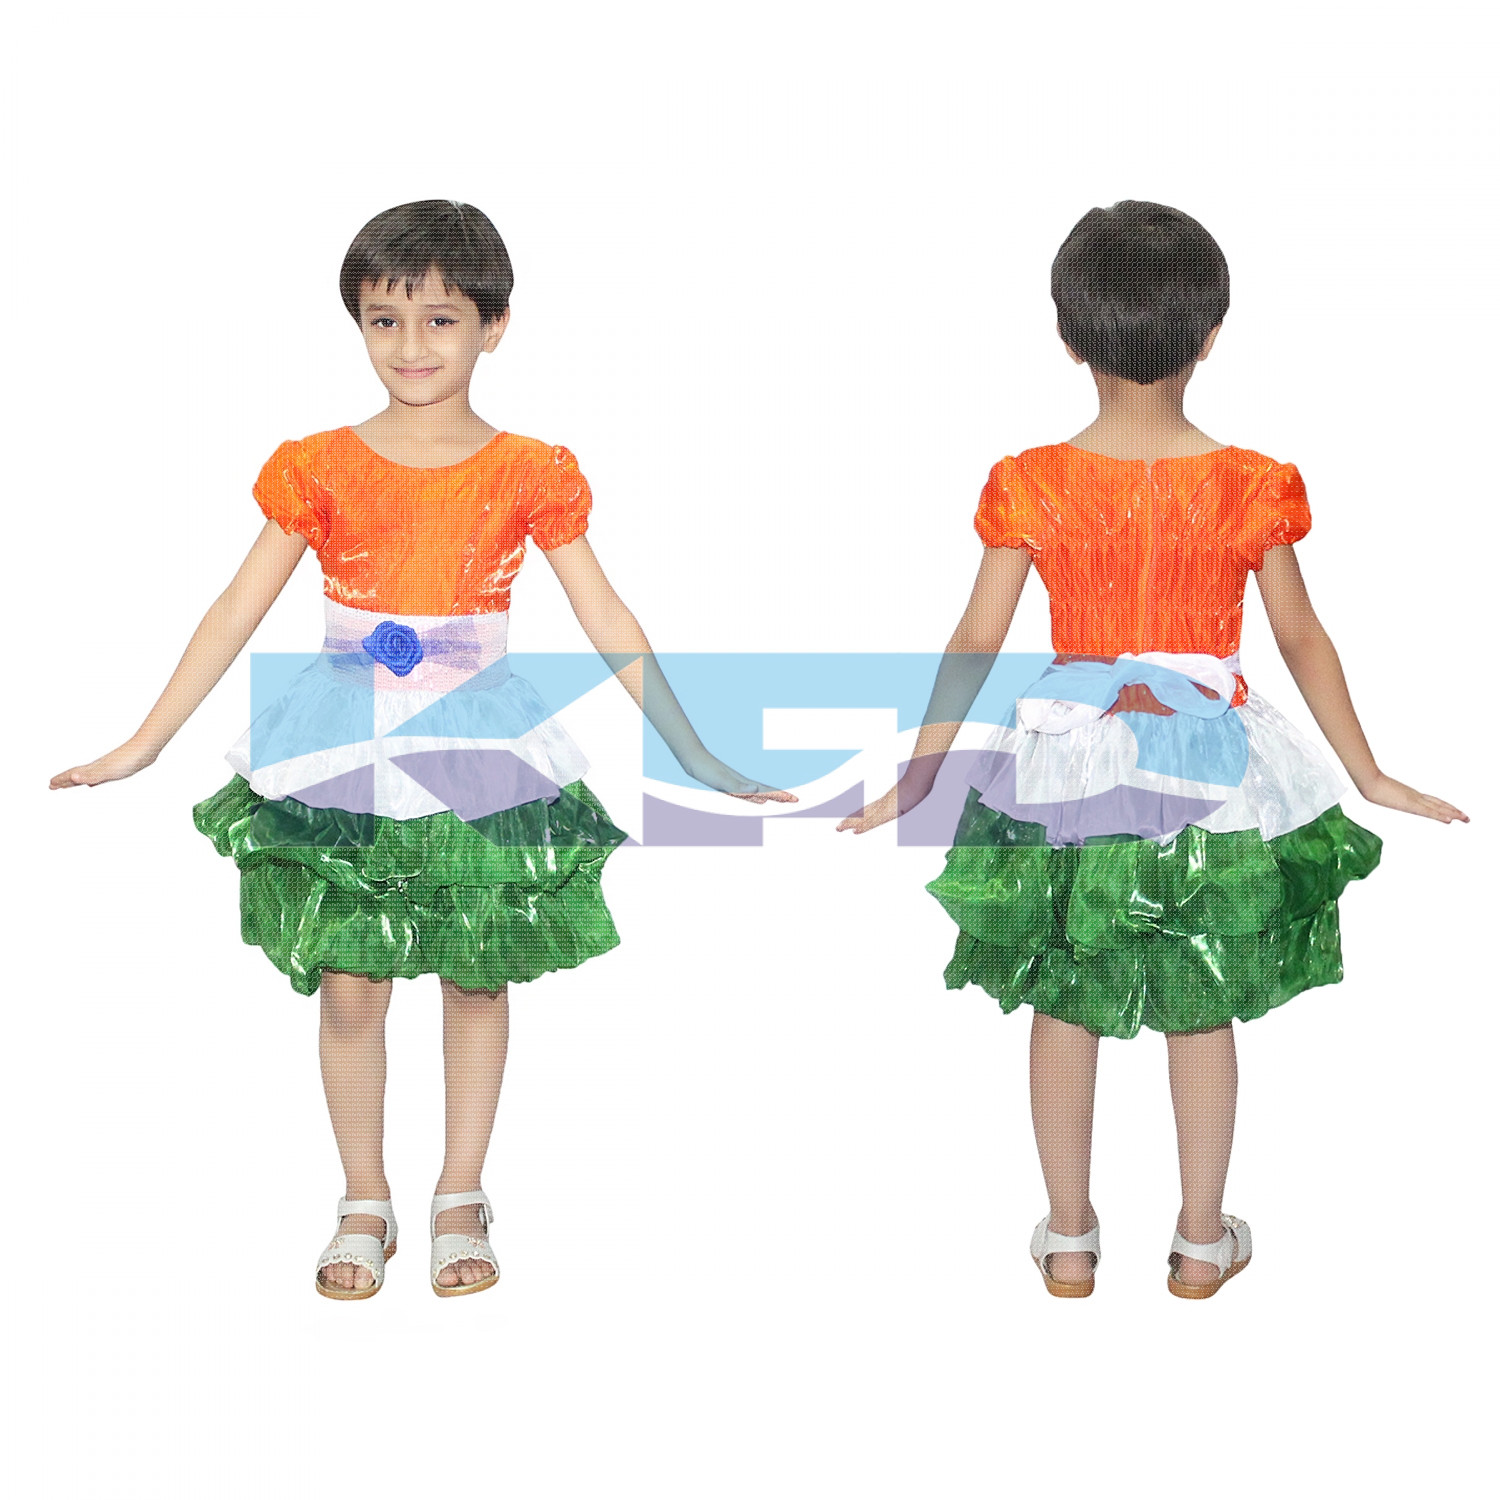 Tri Color frock fancy dress for kids,Western Costume for Annual function/Theme Party/Competition/Stage Shows/Birthday Party Dress